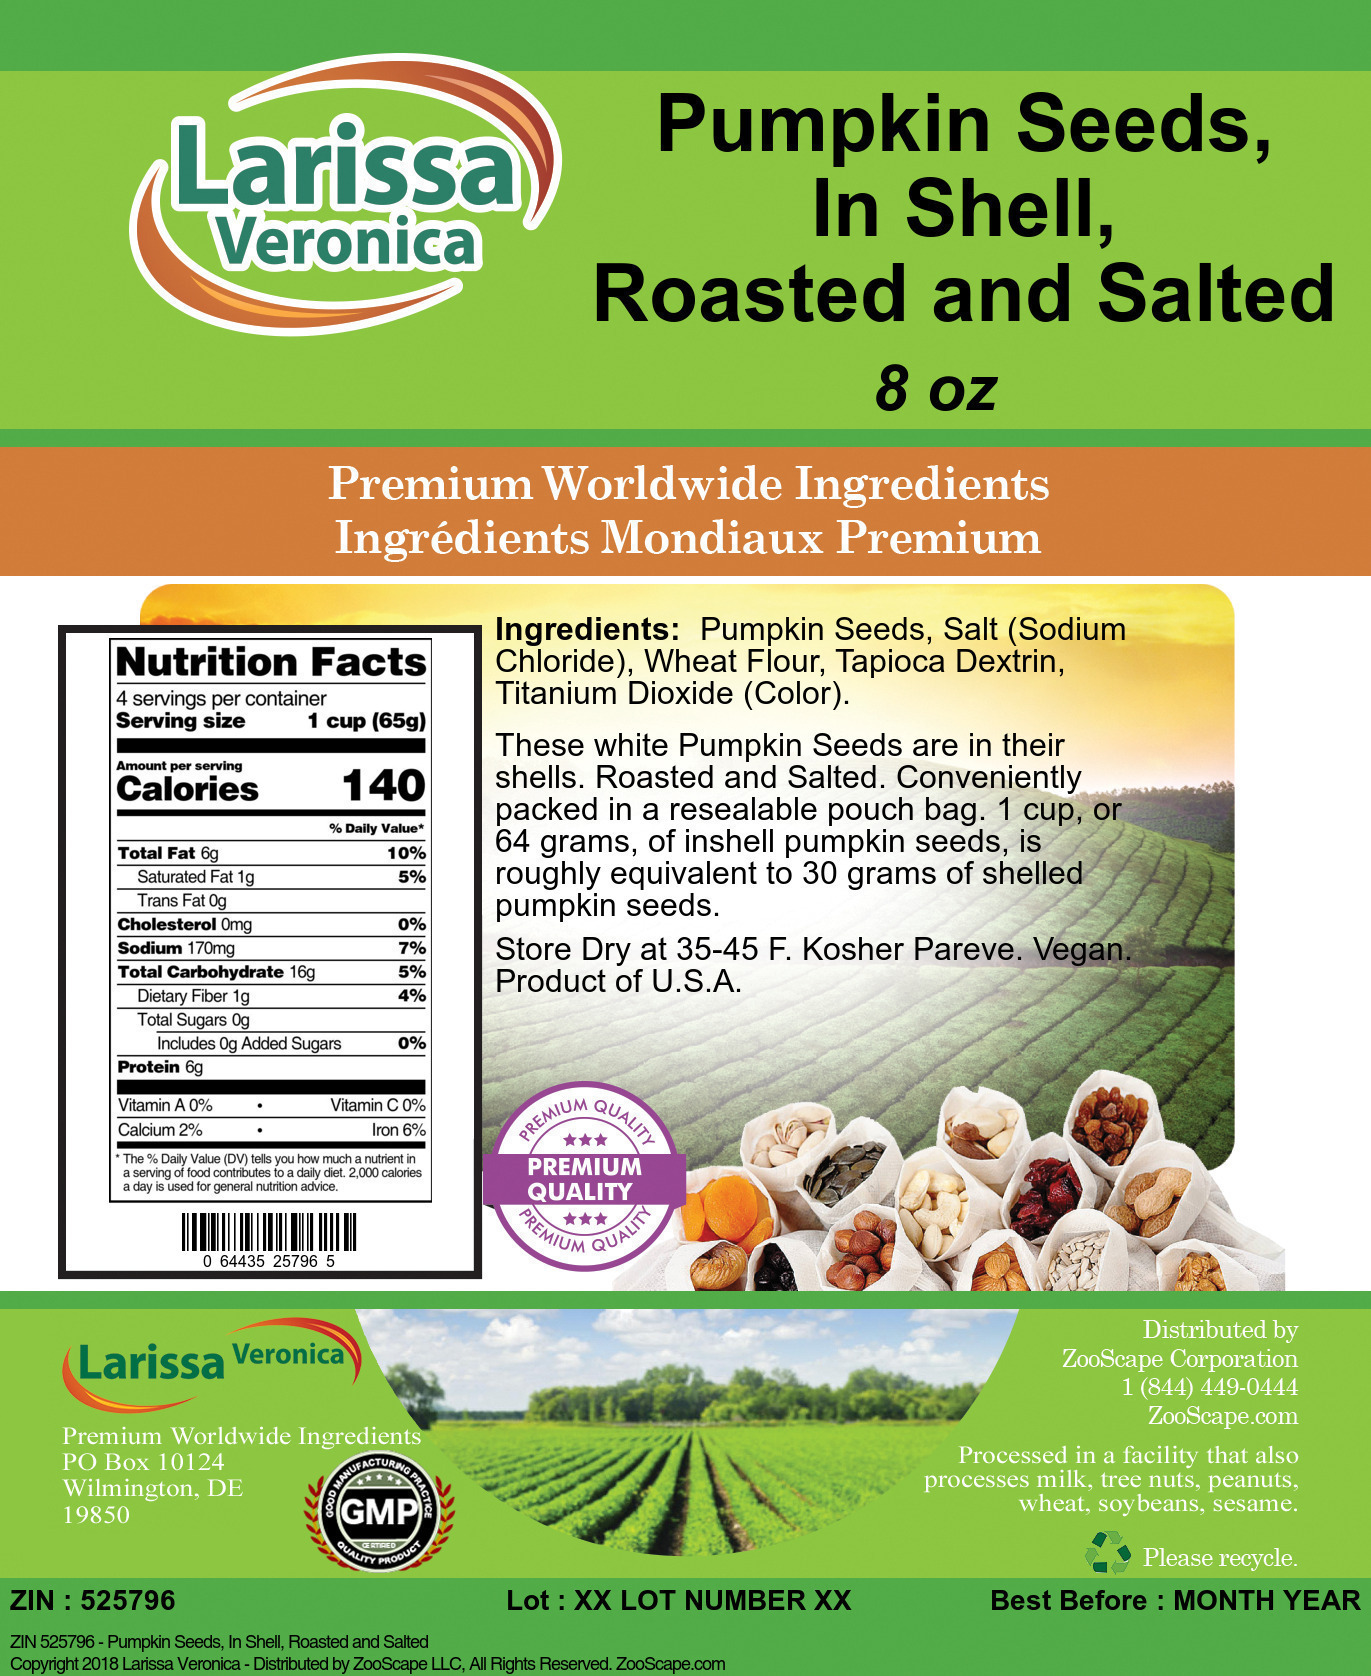 Pumpkin Seeds, In Shell, Roasted and Salted - Label